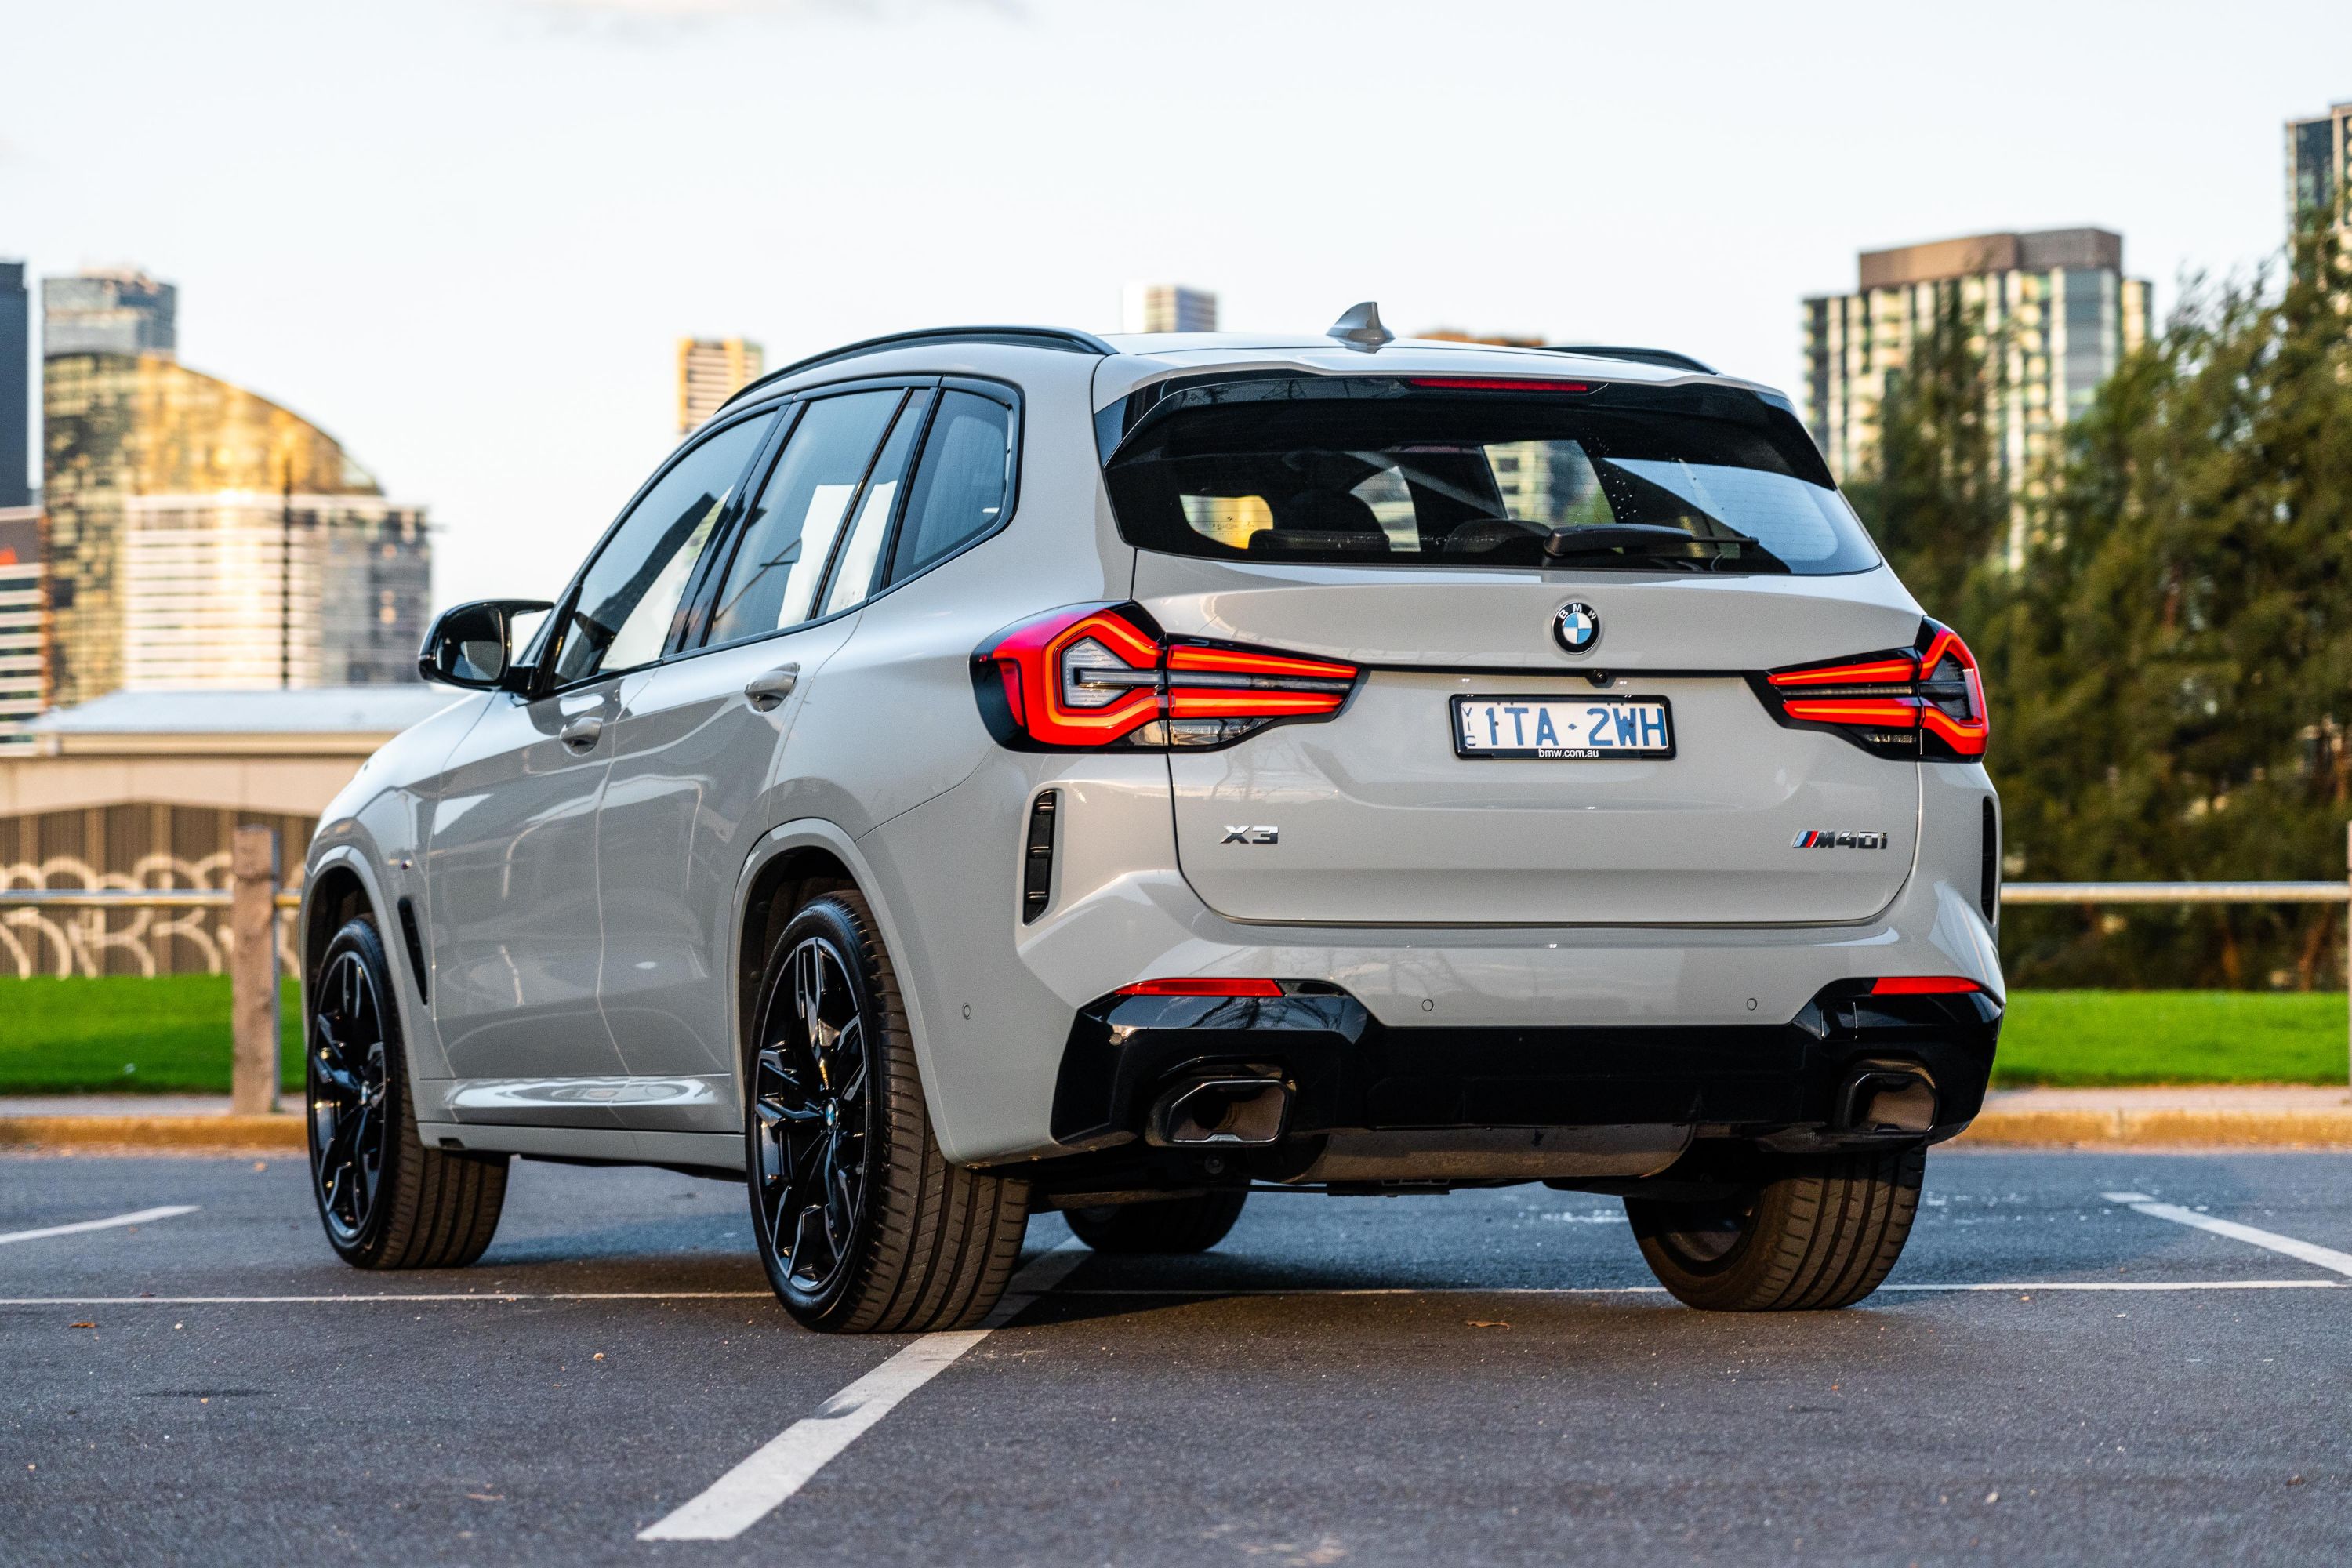 New BMW X3 Model Review